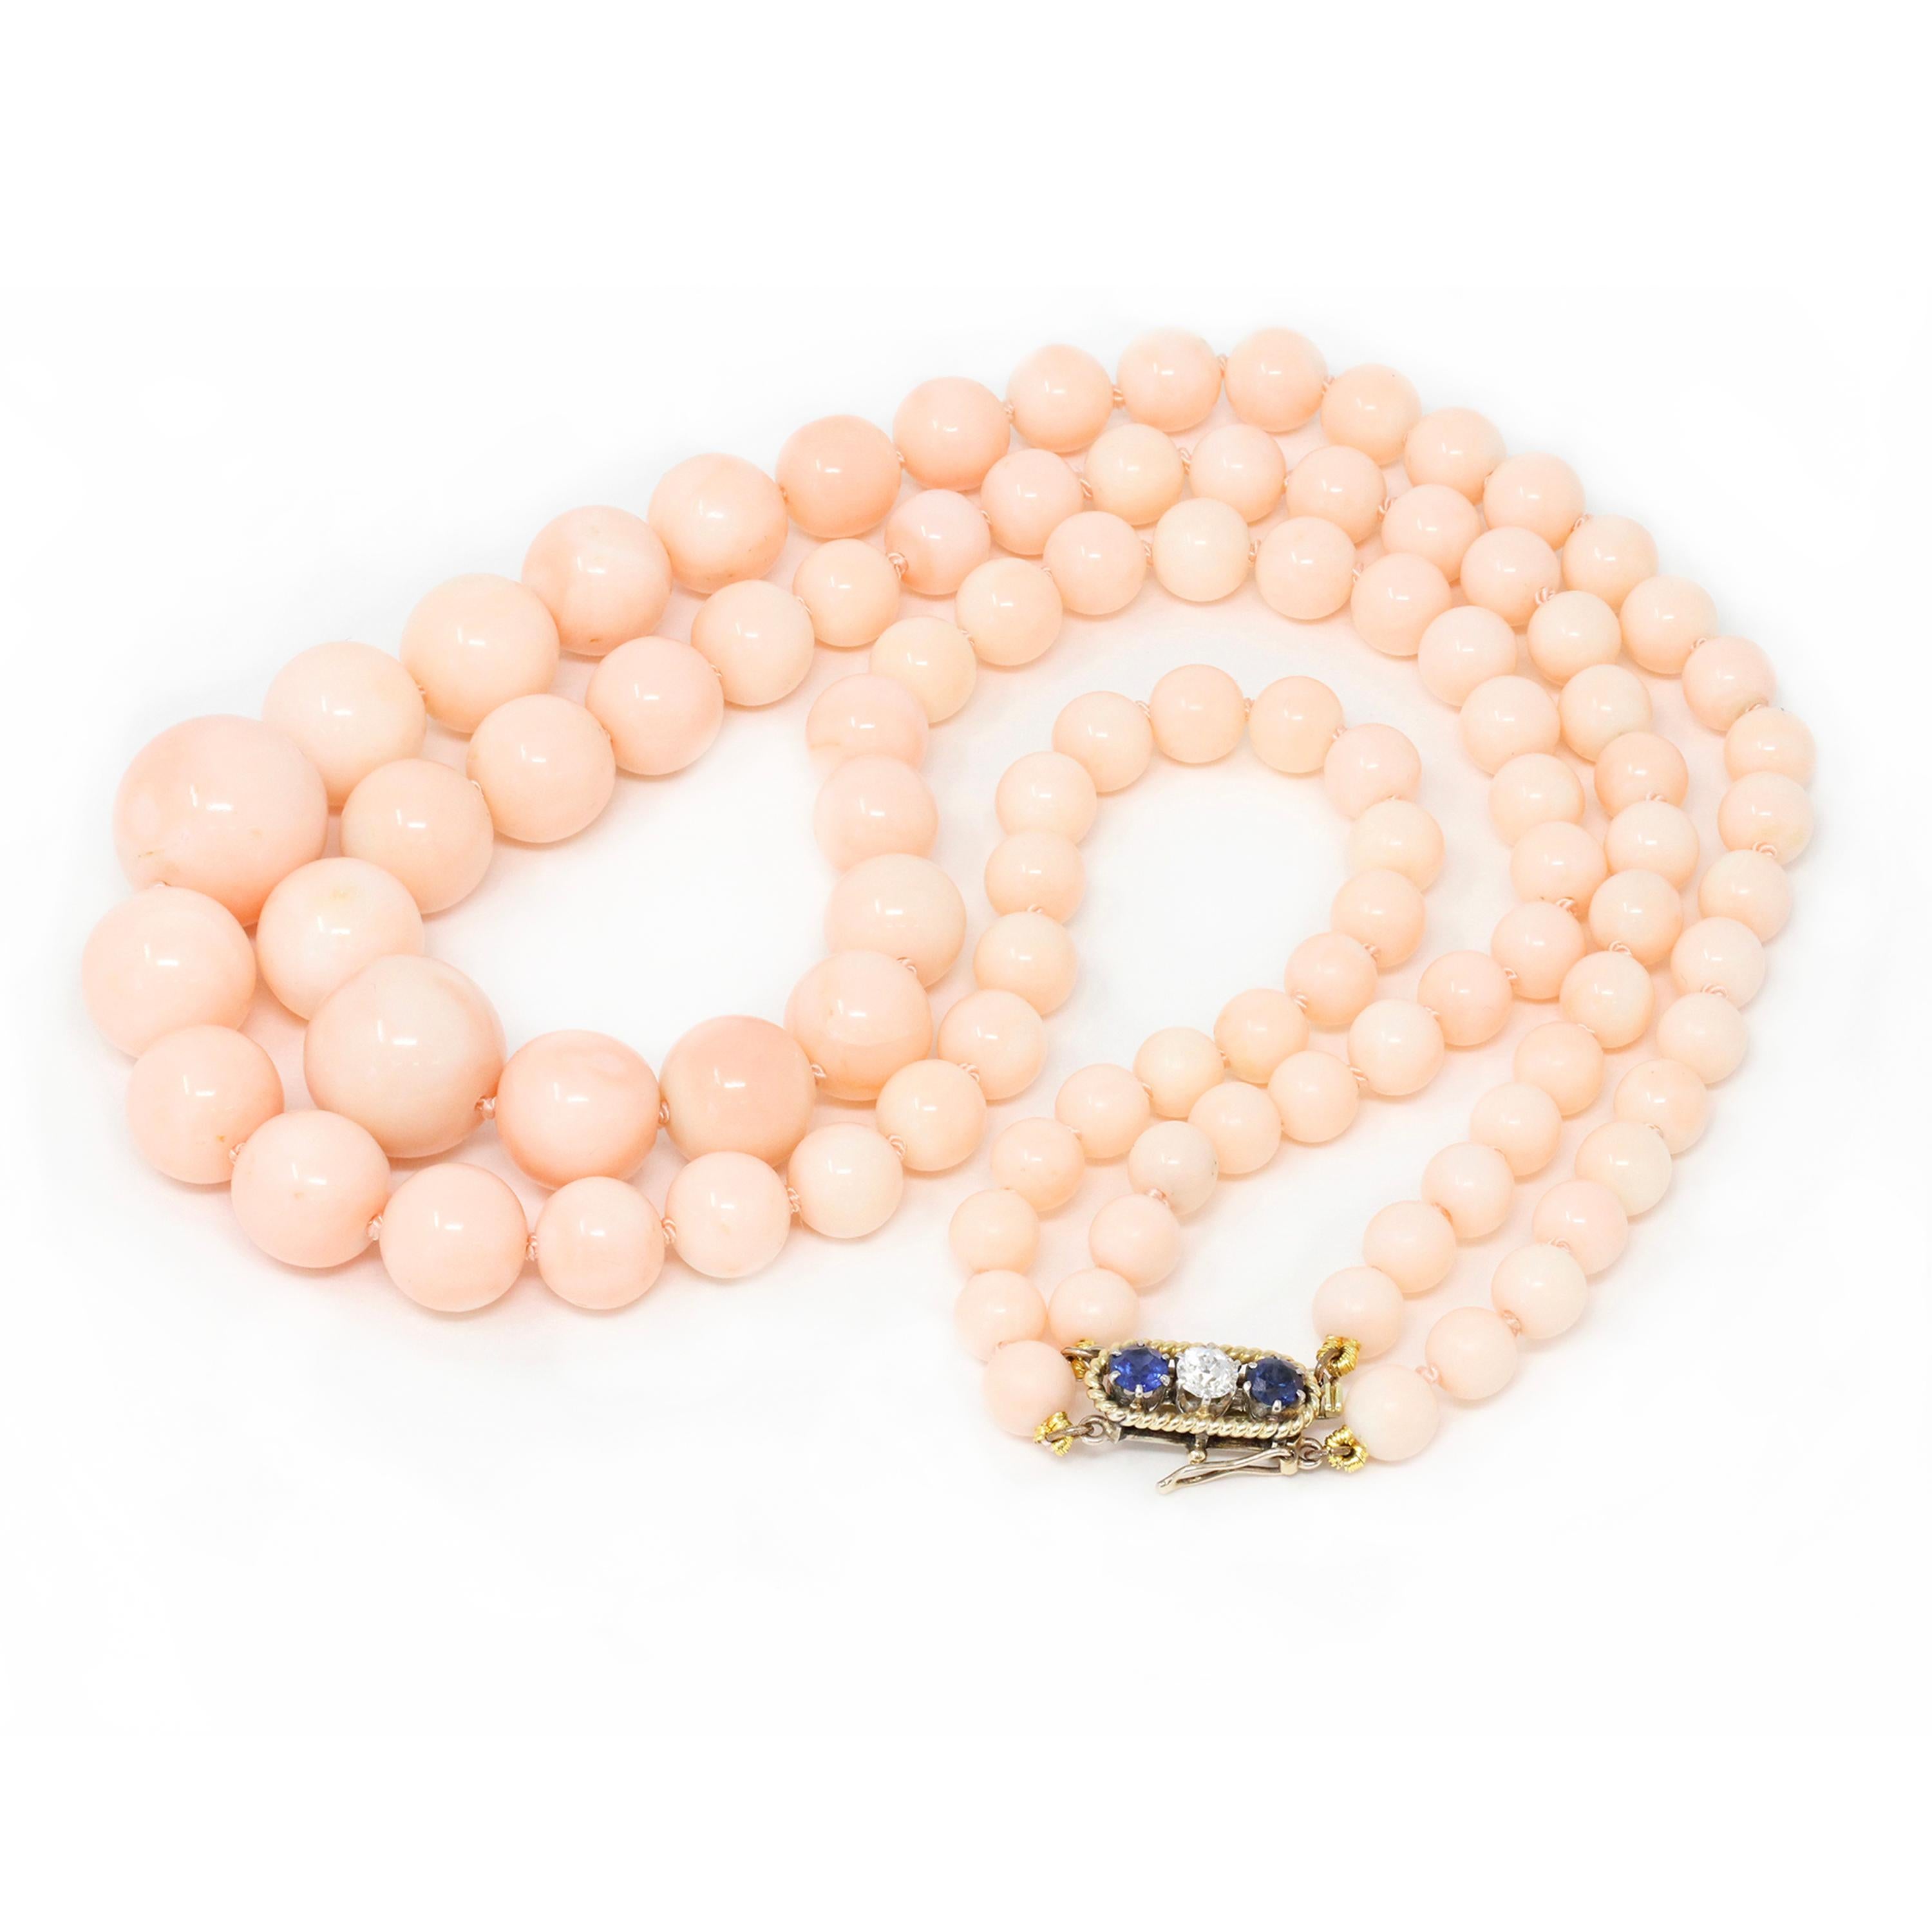 A Vintage Retro Double Strand of Angelskin Beads Necklace with a Diamond and Sapphires clasp. The rare Coral beads display an even blush light pink color, they are very well matched with minimal surface inclusions. The two strands of forty-nine and